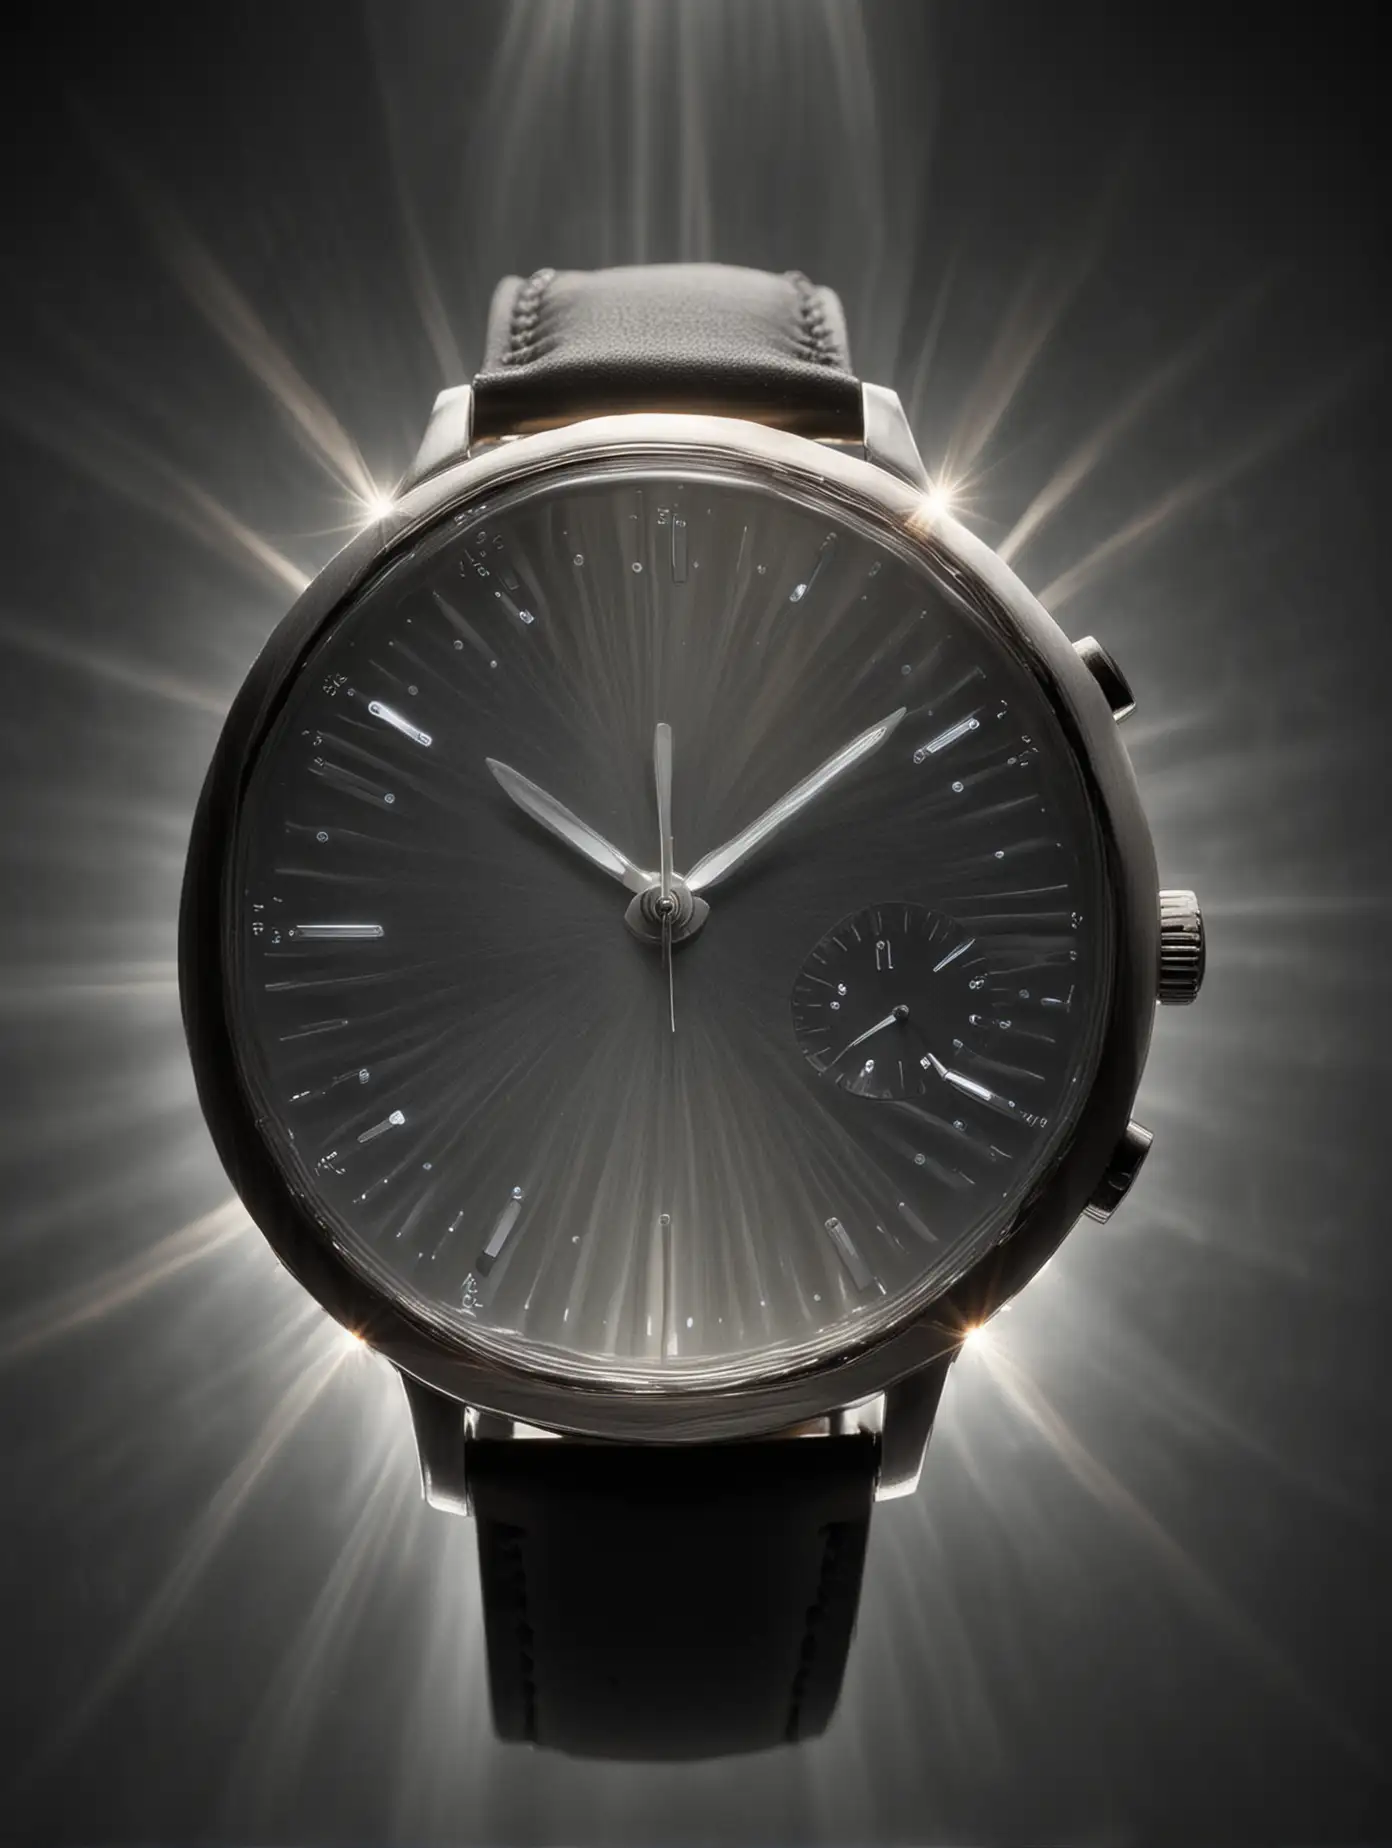 Circular Watch with Radiant Light Beams